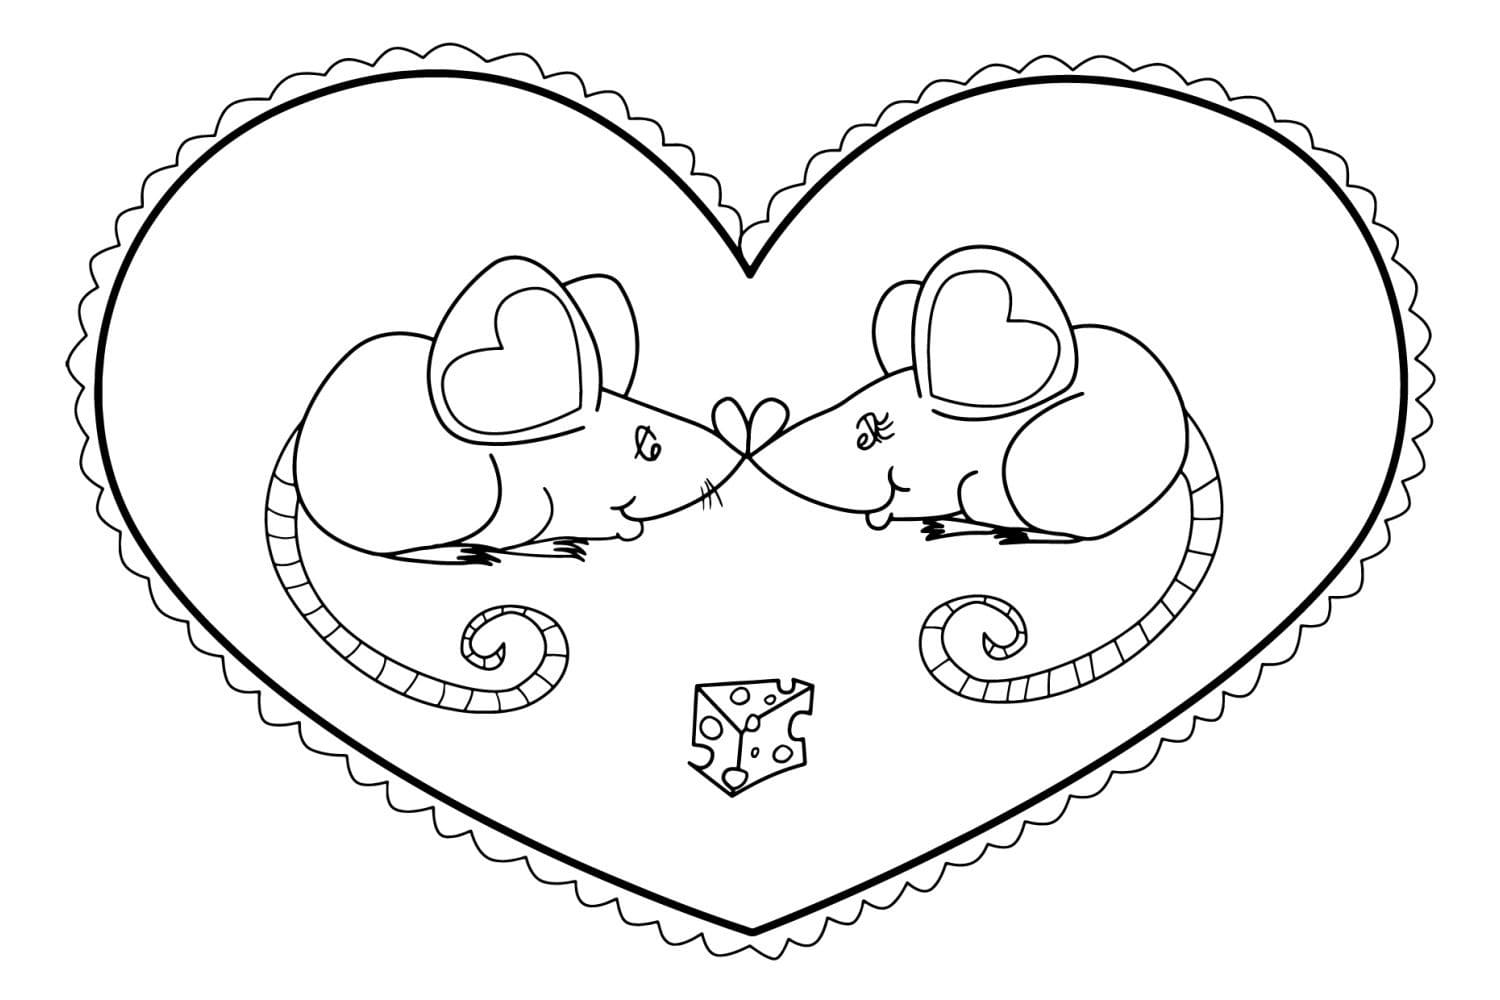 Coloring page Valentine's Day Mice love each other